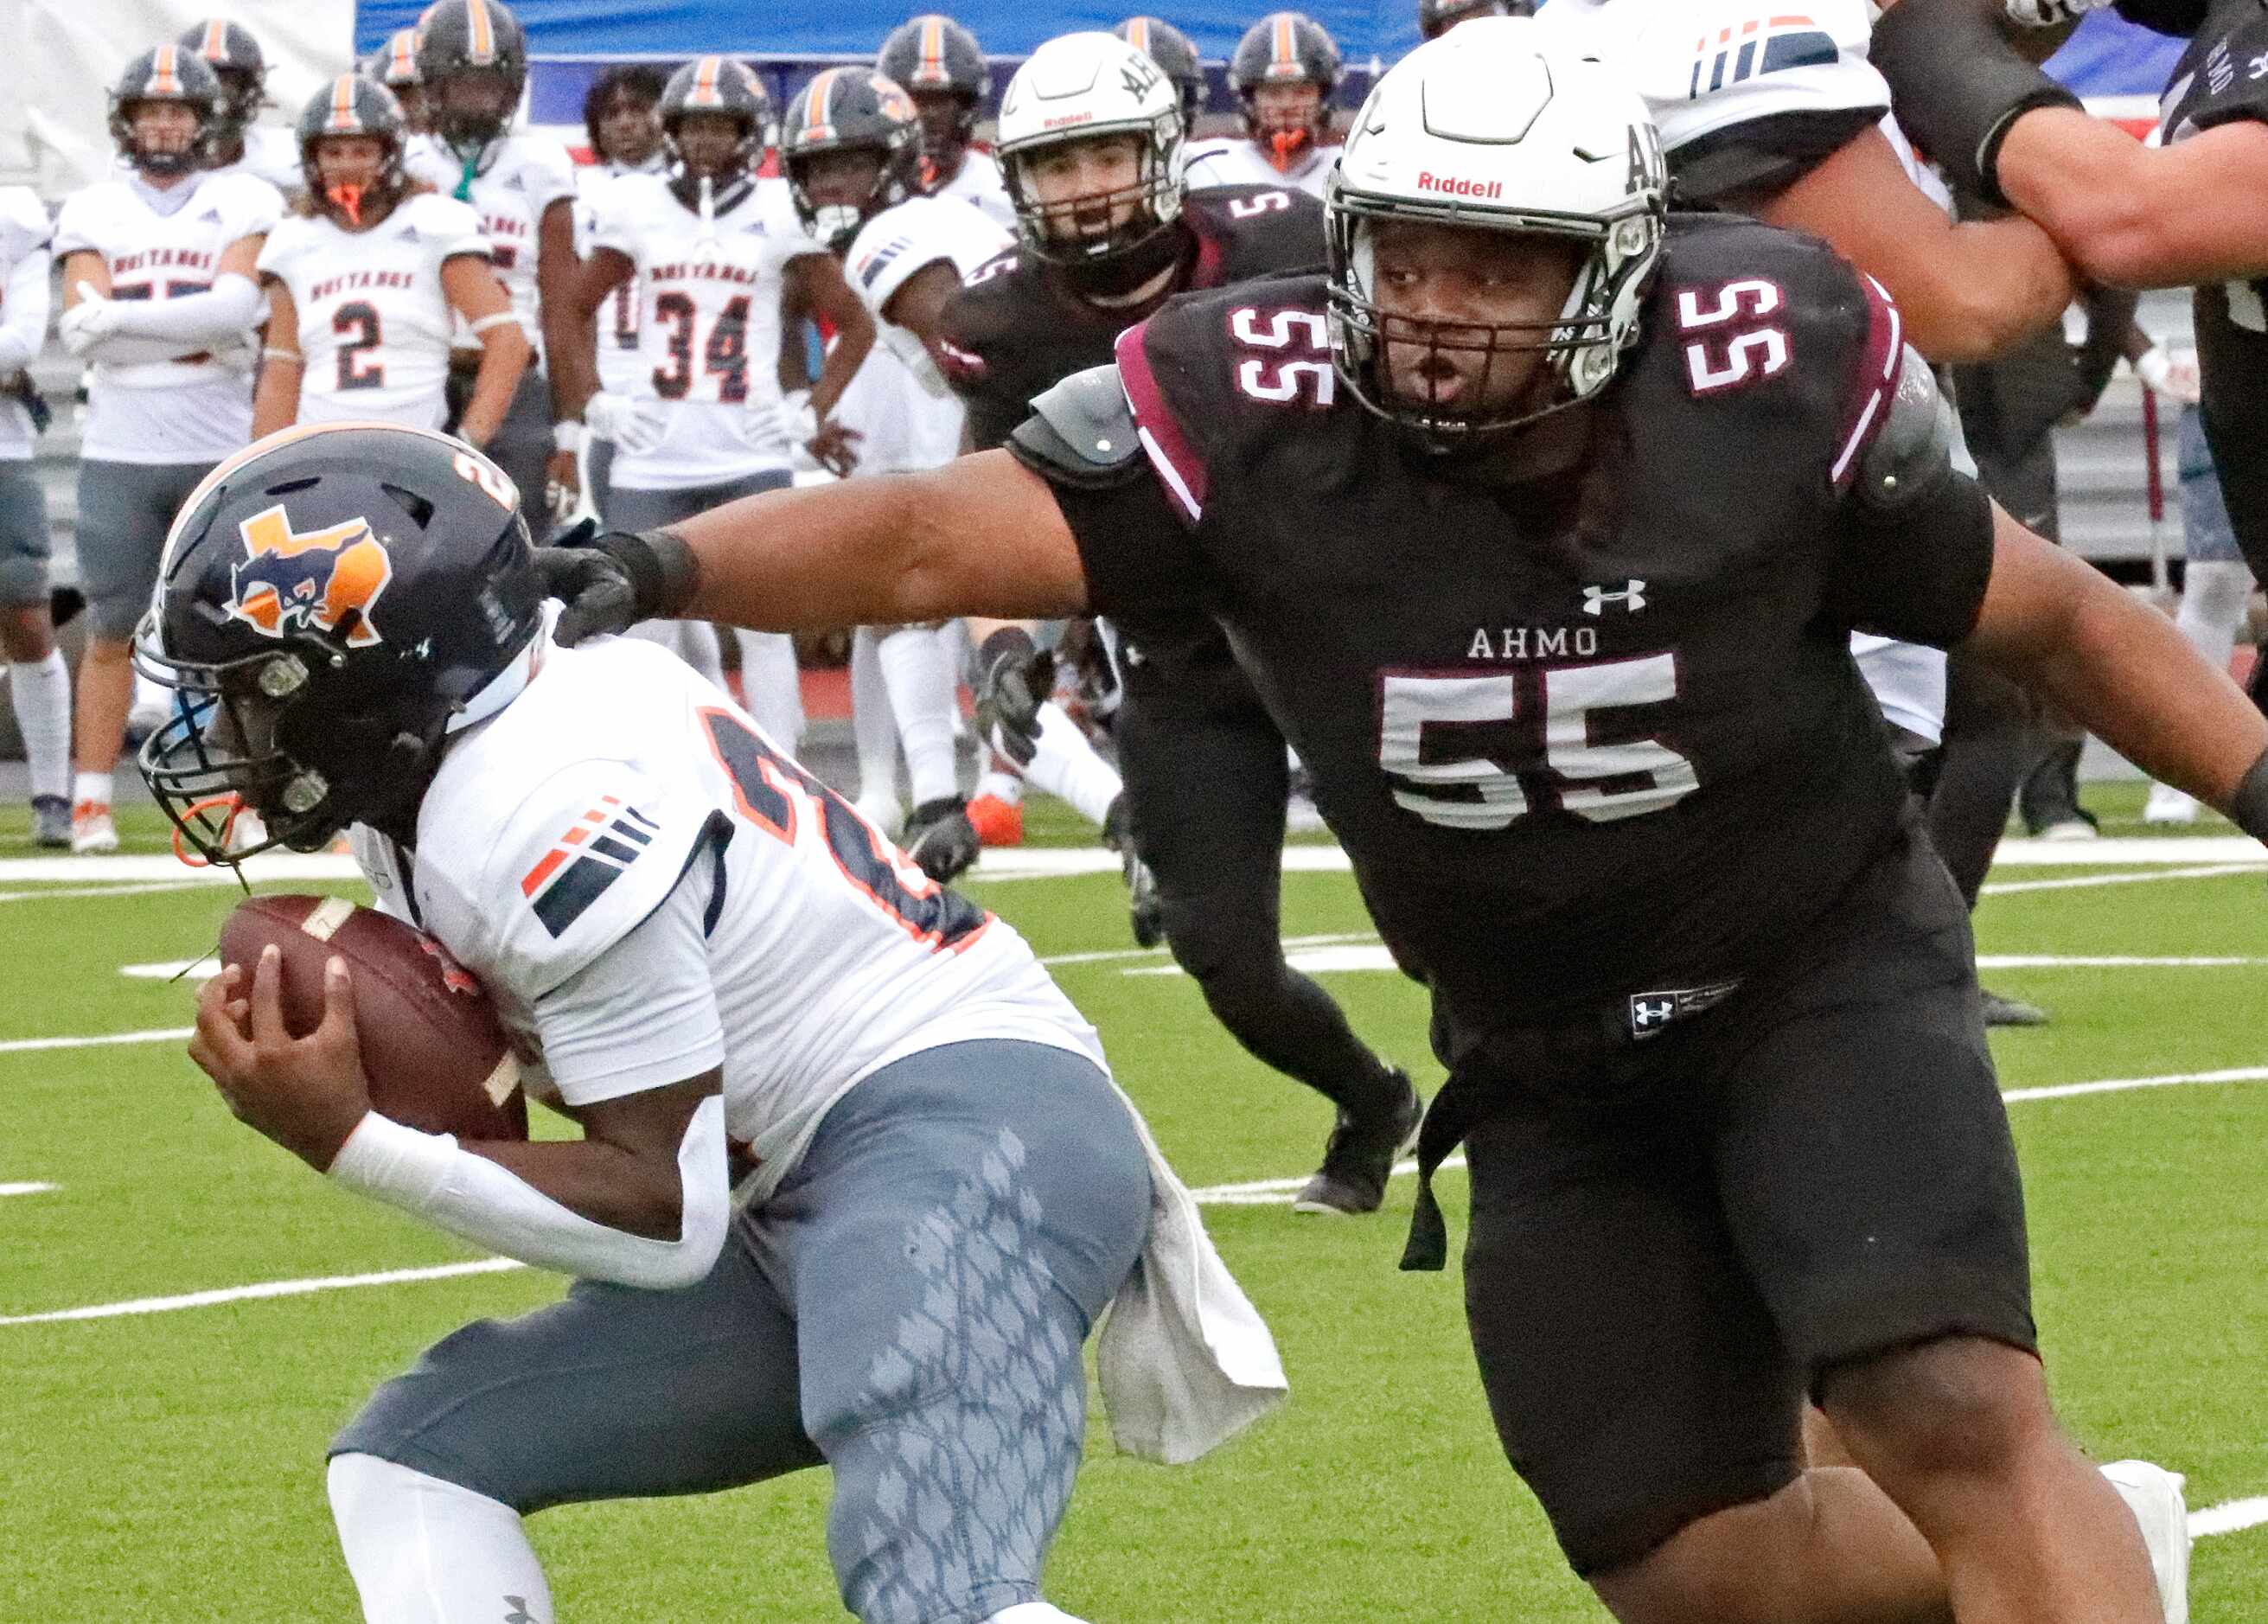 Wylie High School defensive lineman Cam Draper (55) reaches to tackle Sachse High School...